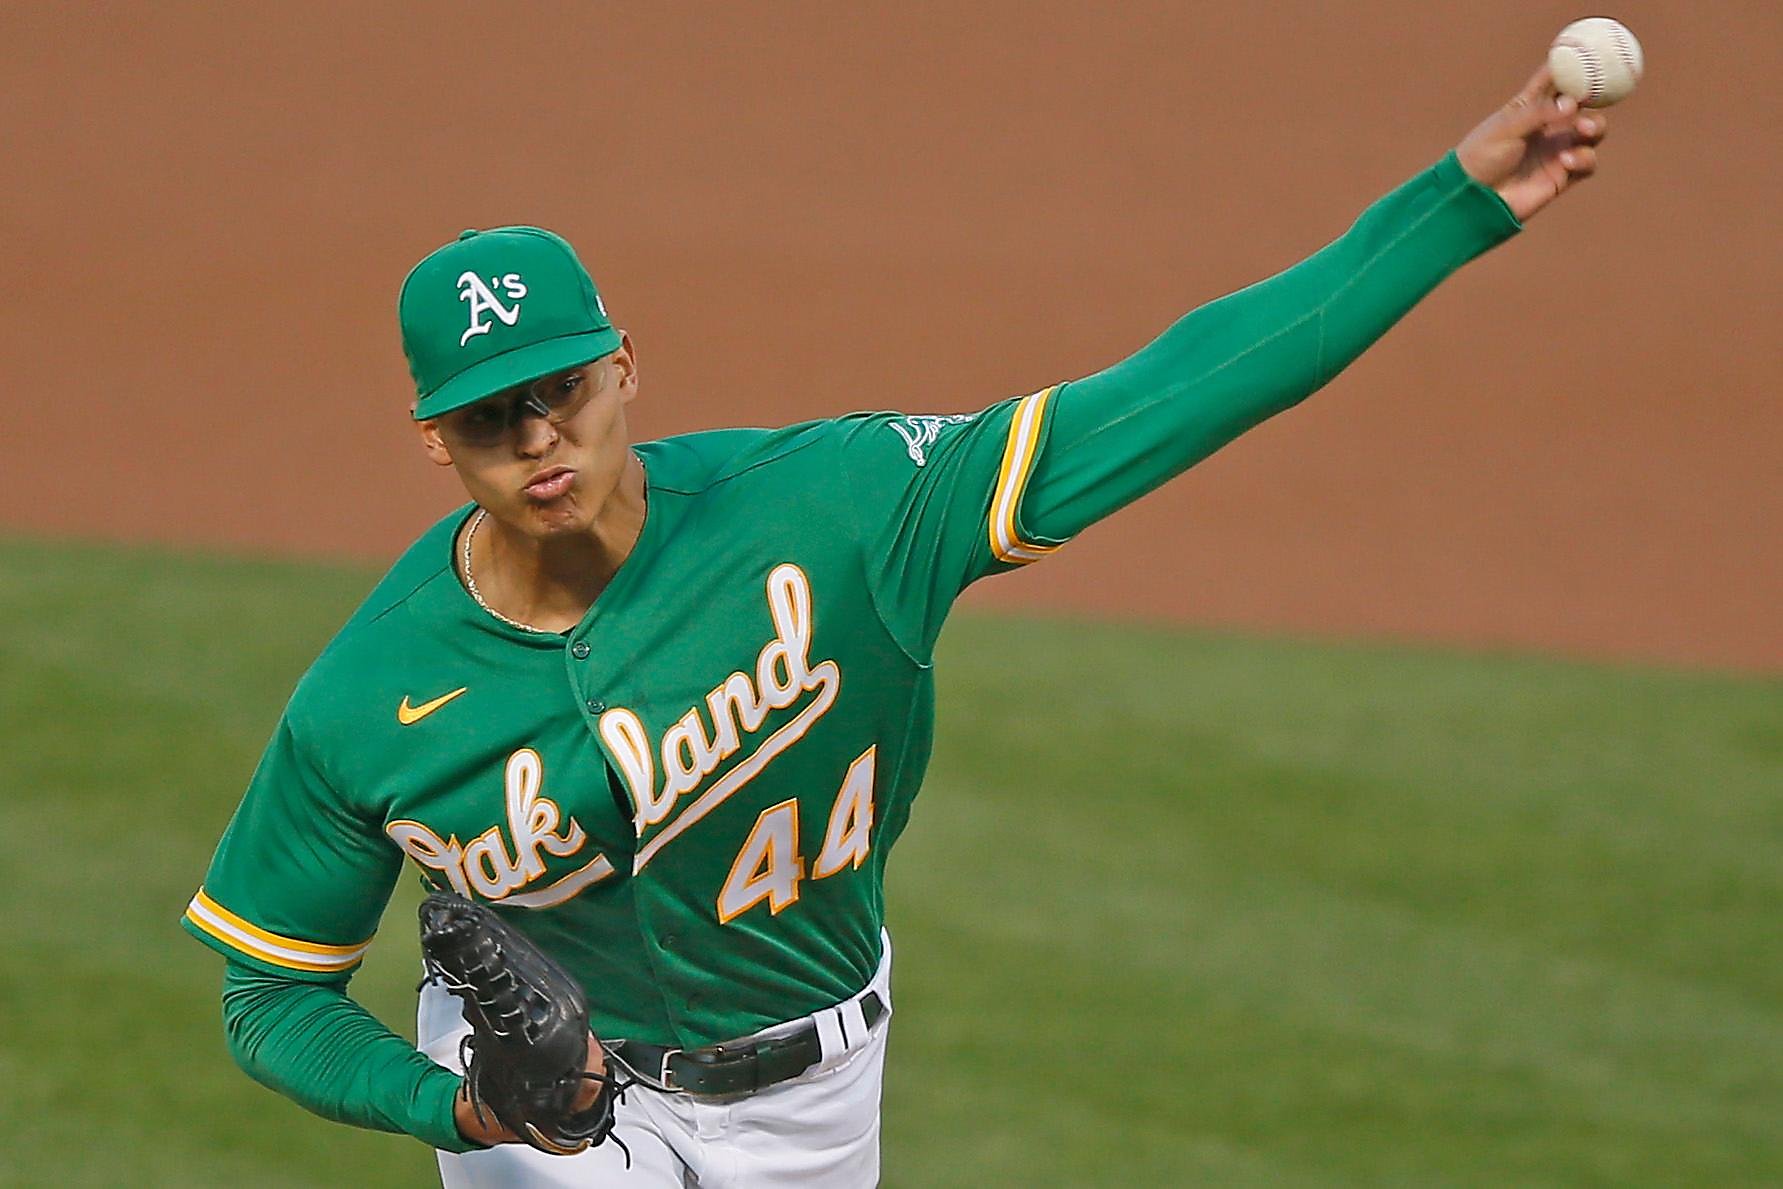 A's pitcher Jesus Luzardo tests positive for COVID-19